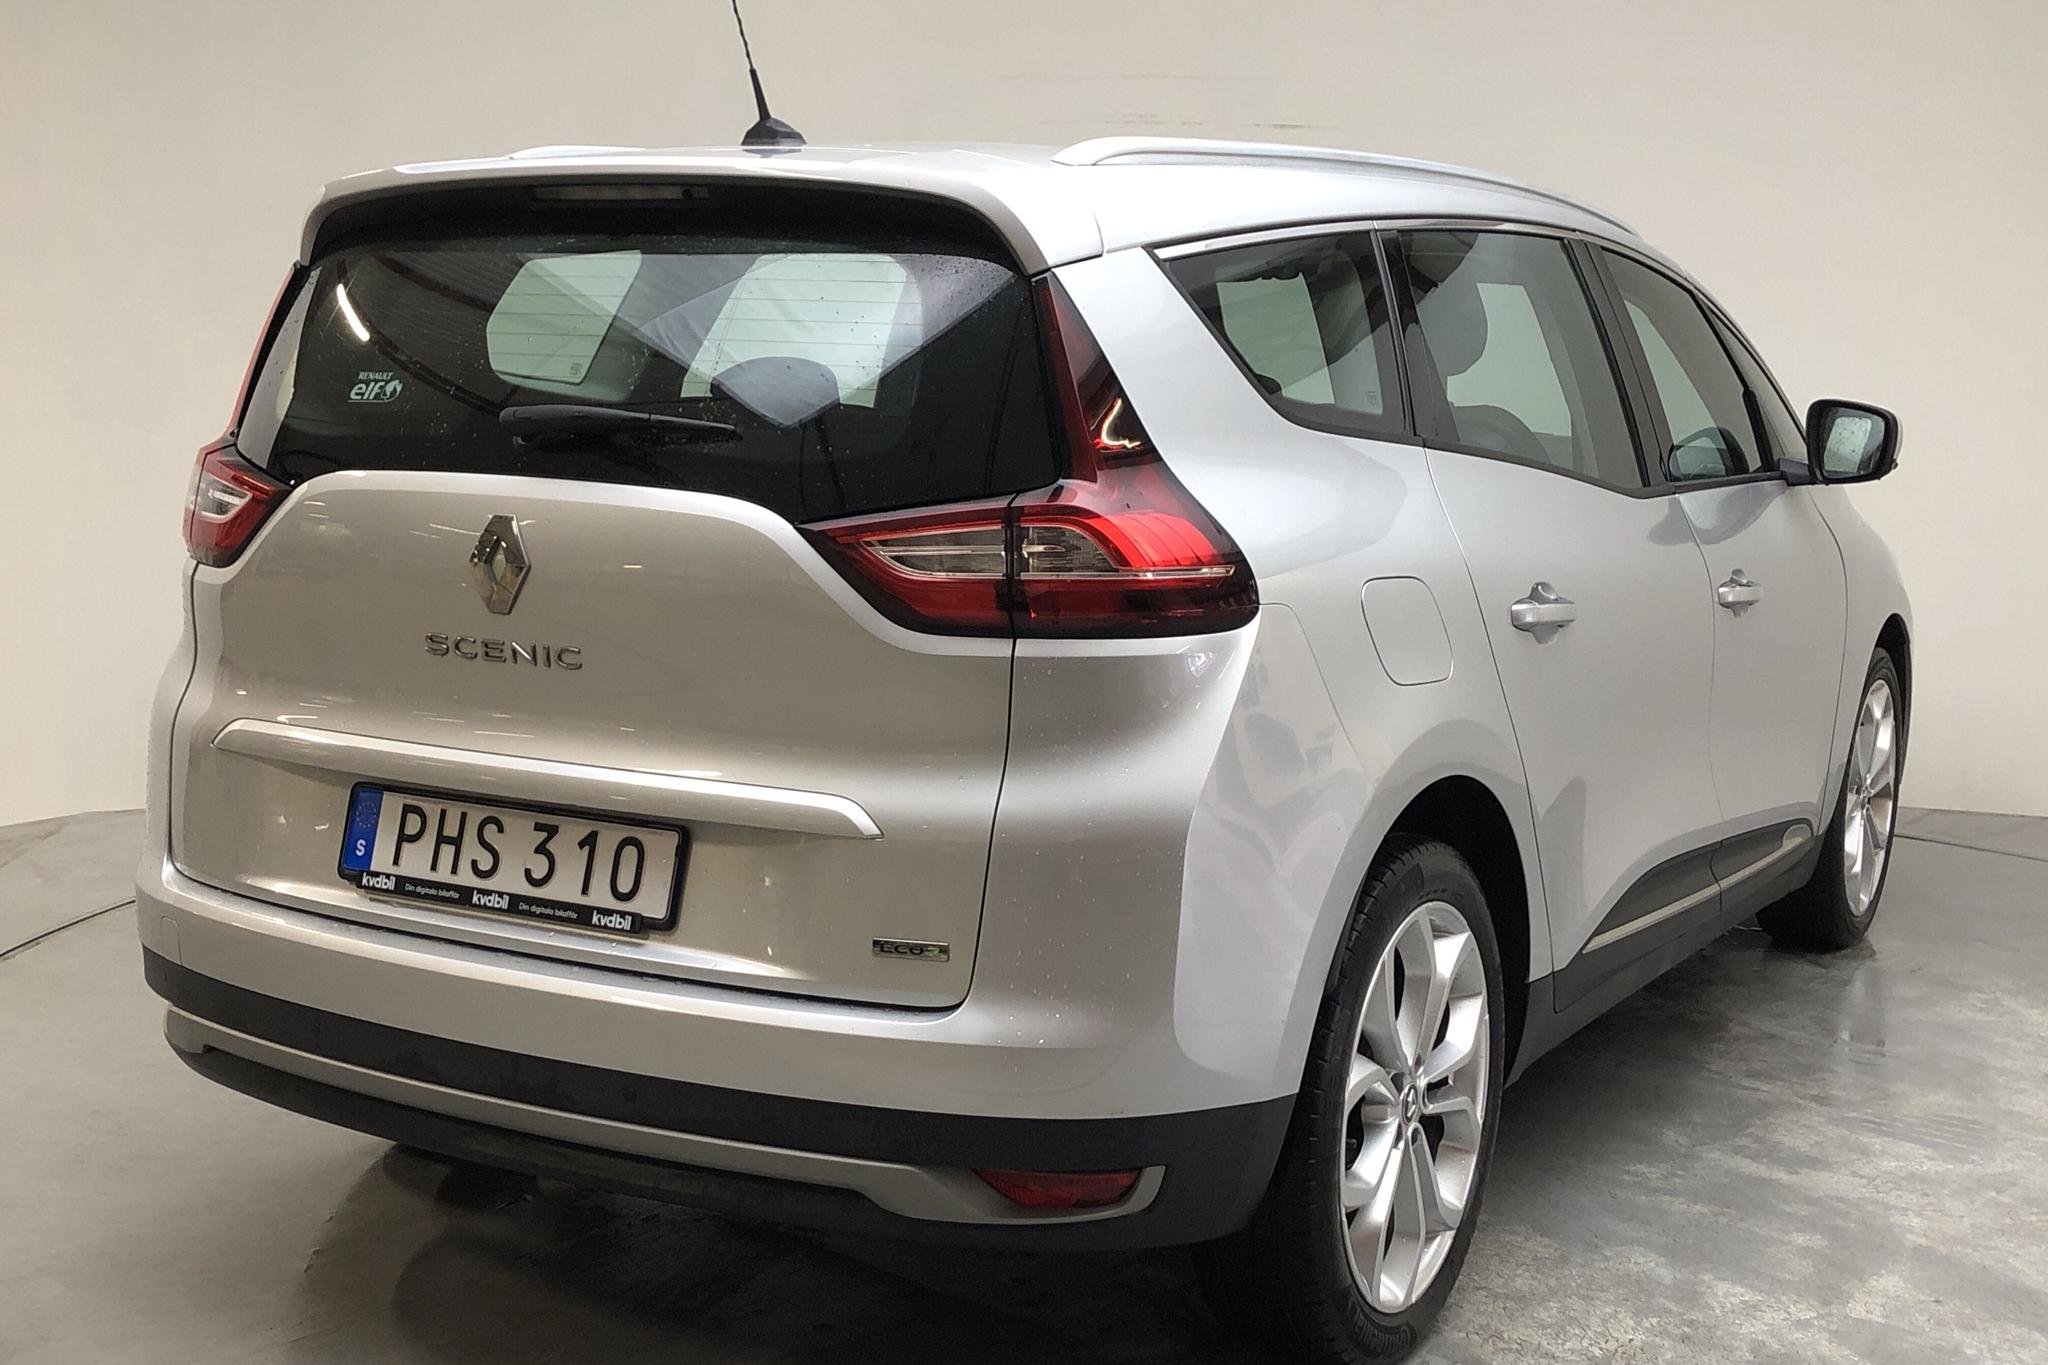 Renault Grand Scénic 1.5 dCi (110hk) - 9 692 mil - Manuell - silver - 2017